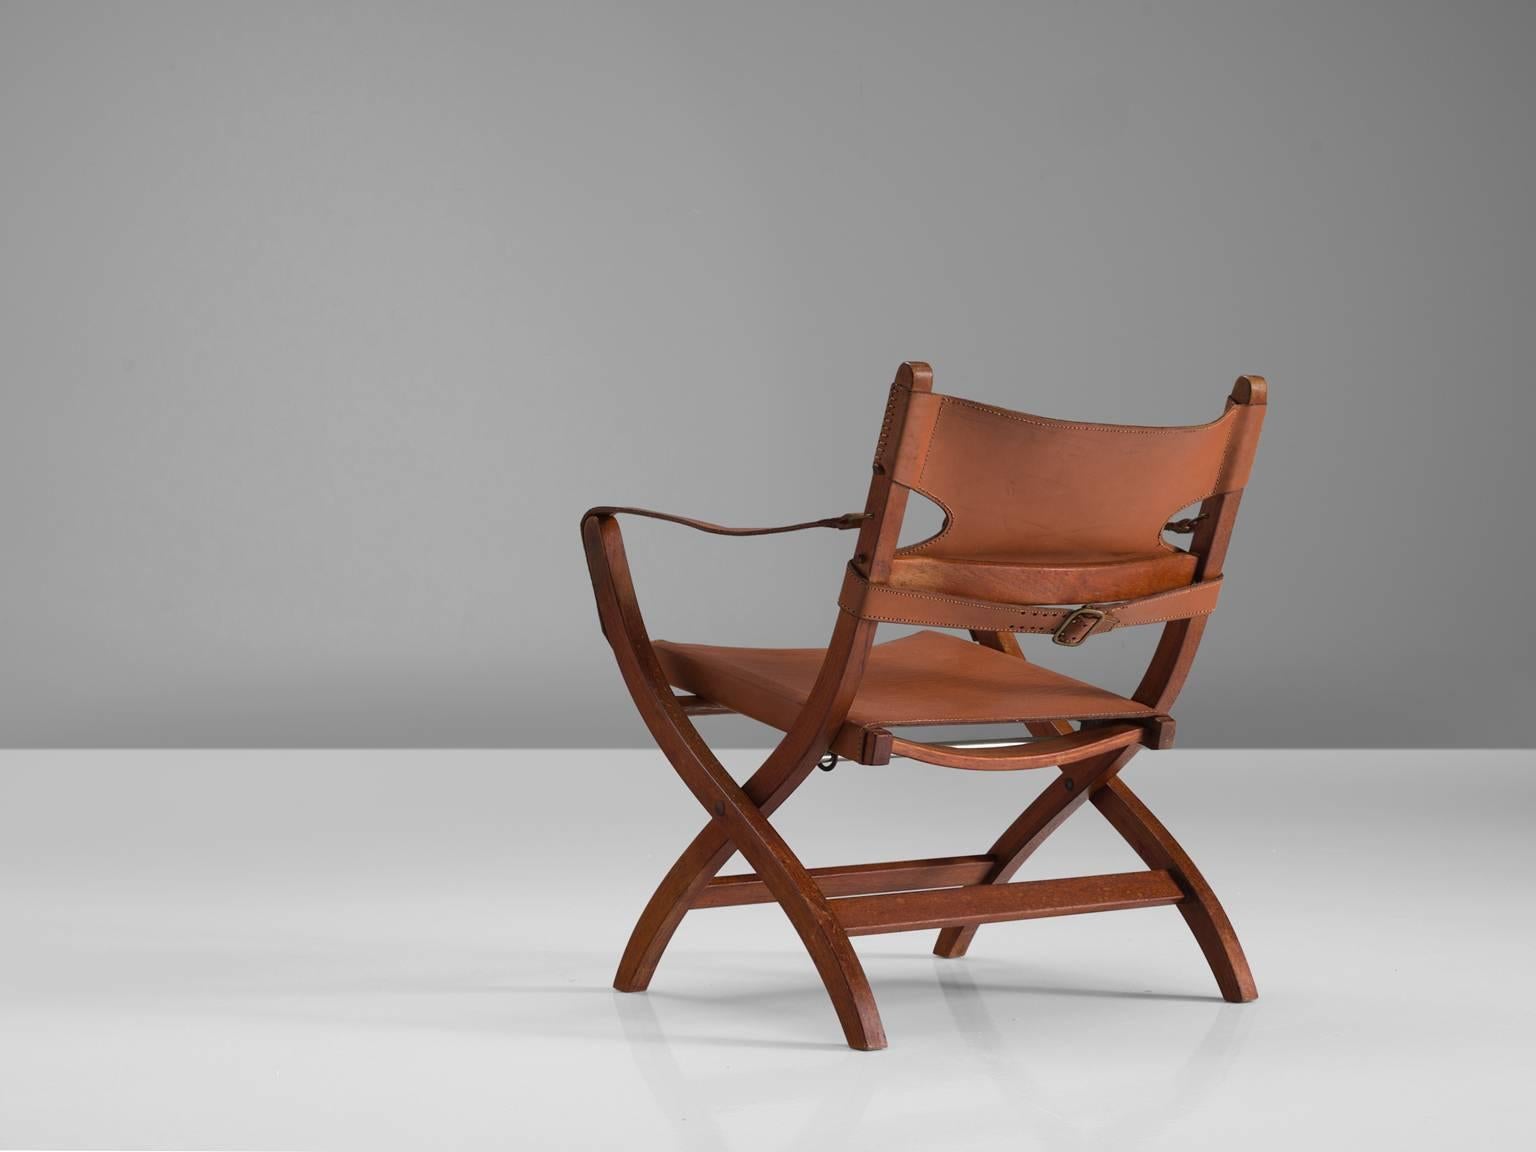 Scandinavian Modern Poul Hundevad 'Campaign' X-Chairs in Cognac Leather